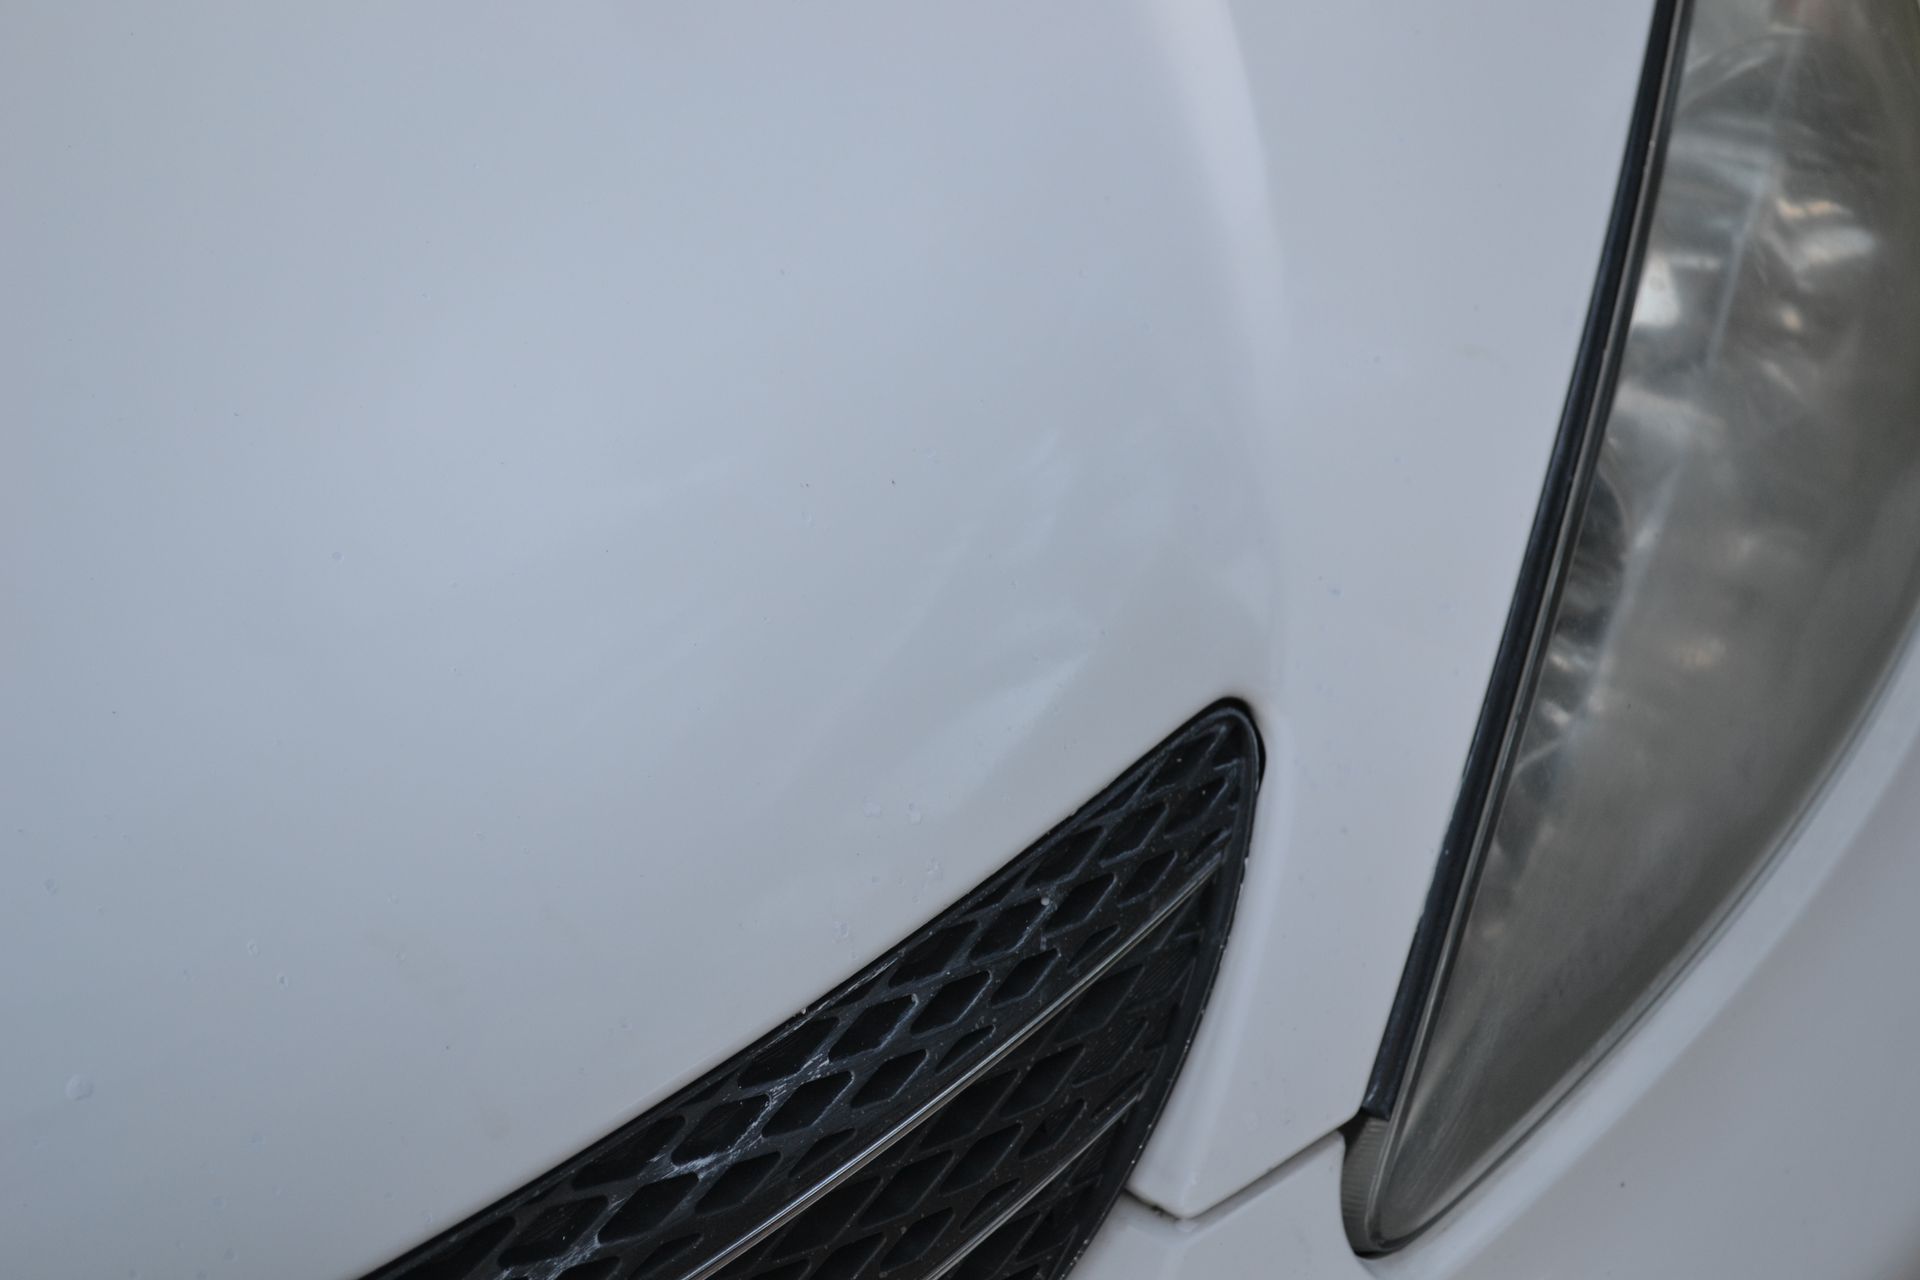 A close up of a white car 's hood and headlight.